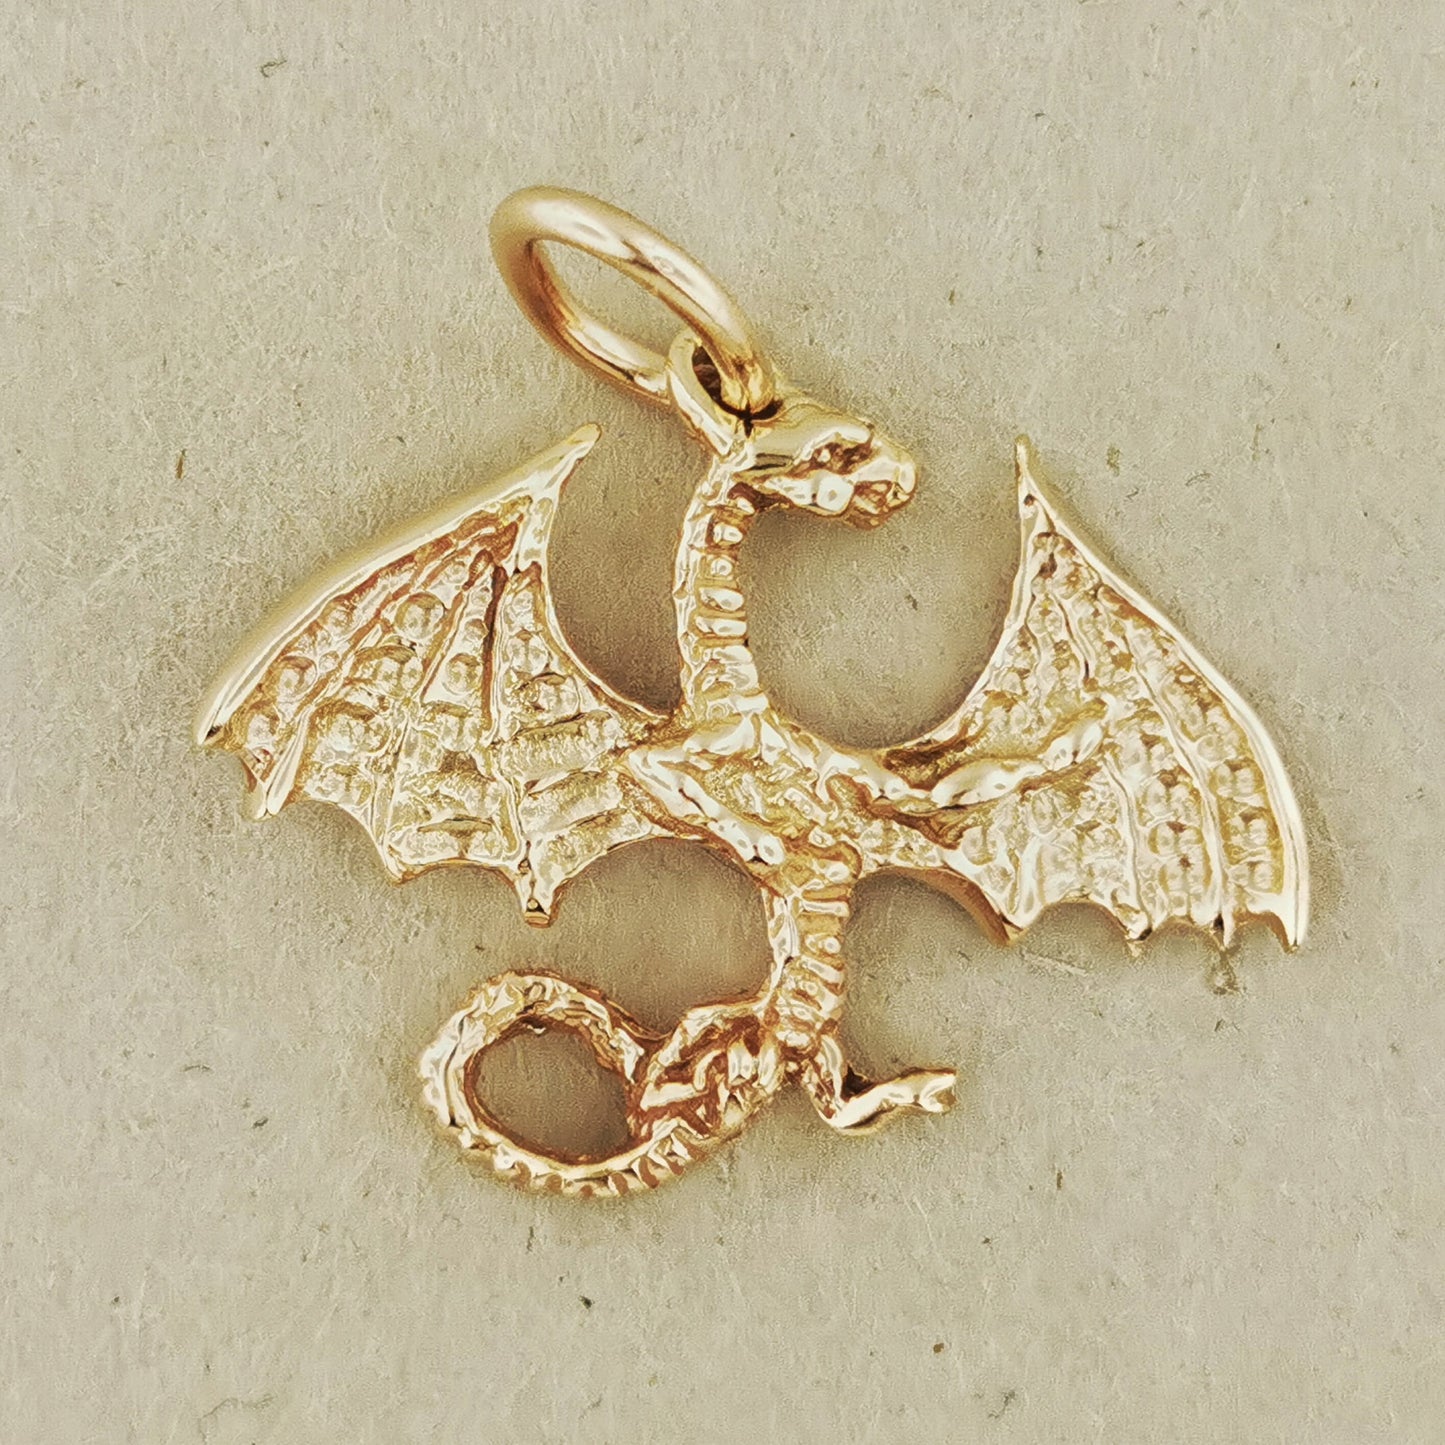 European Dragon Pendant in Sterling Silver or Antique Bronze, Bronze Dragon Pendant, Bronze Dragon Jewelry, bronze Dragon Jewellery, Bronze Dragon Pendant, Here Be Dragons, Bronze Dragon Charm, Bronze Dragon Jewellery, Medieval Dragon Pendant, Fantasy Dragon Pendant, European Dragon Pendant